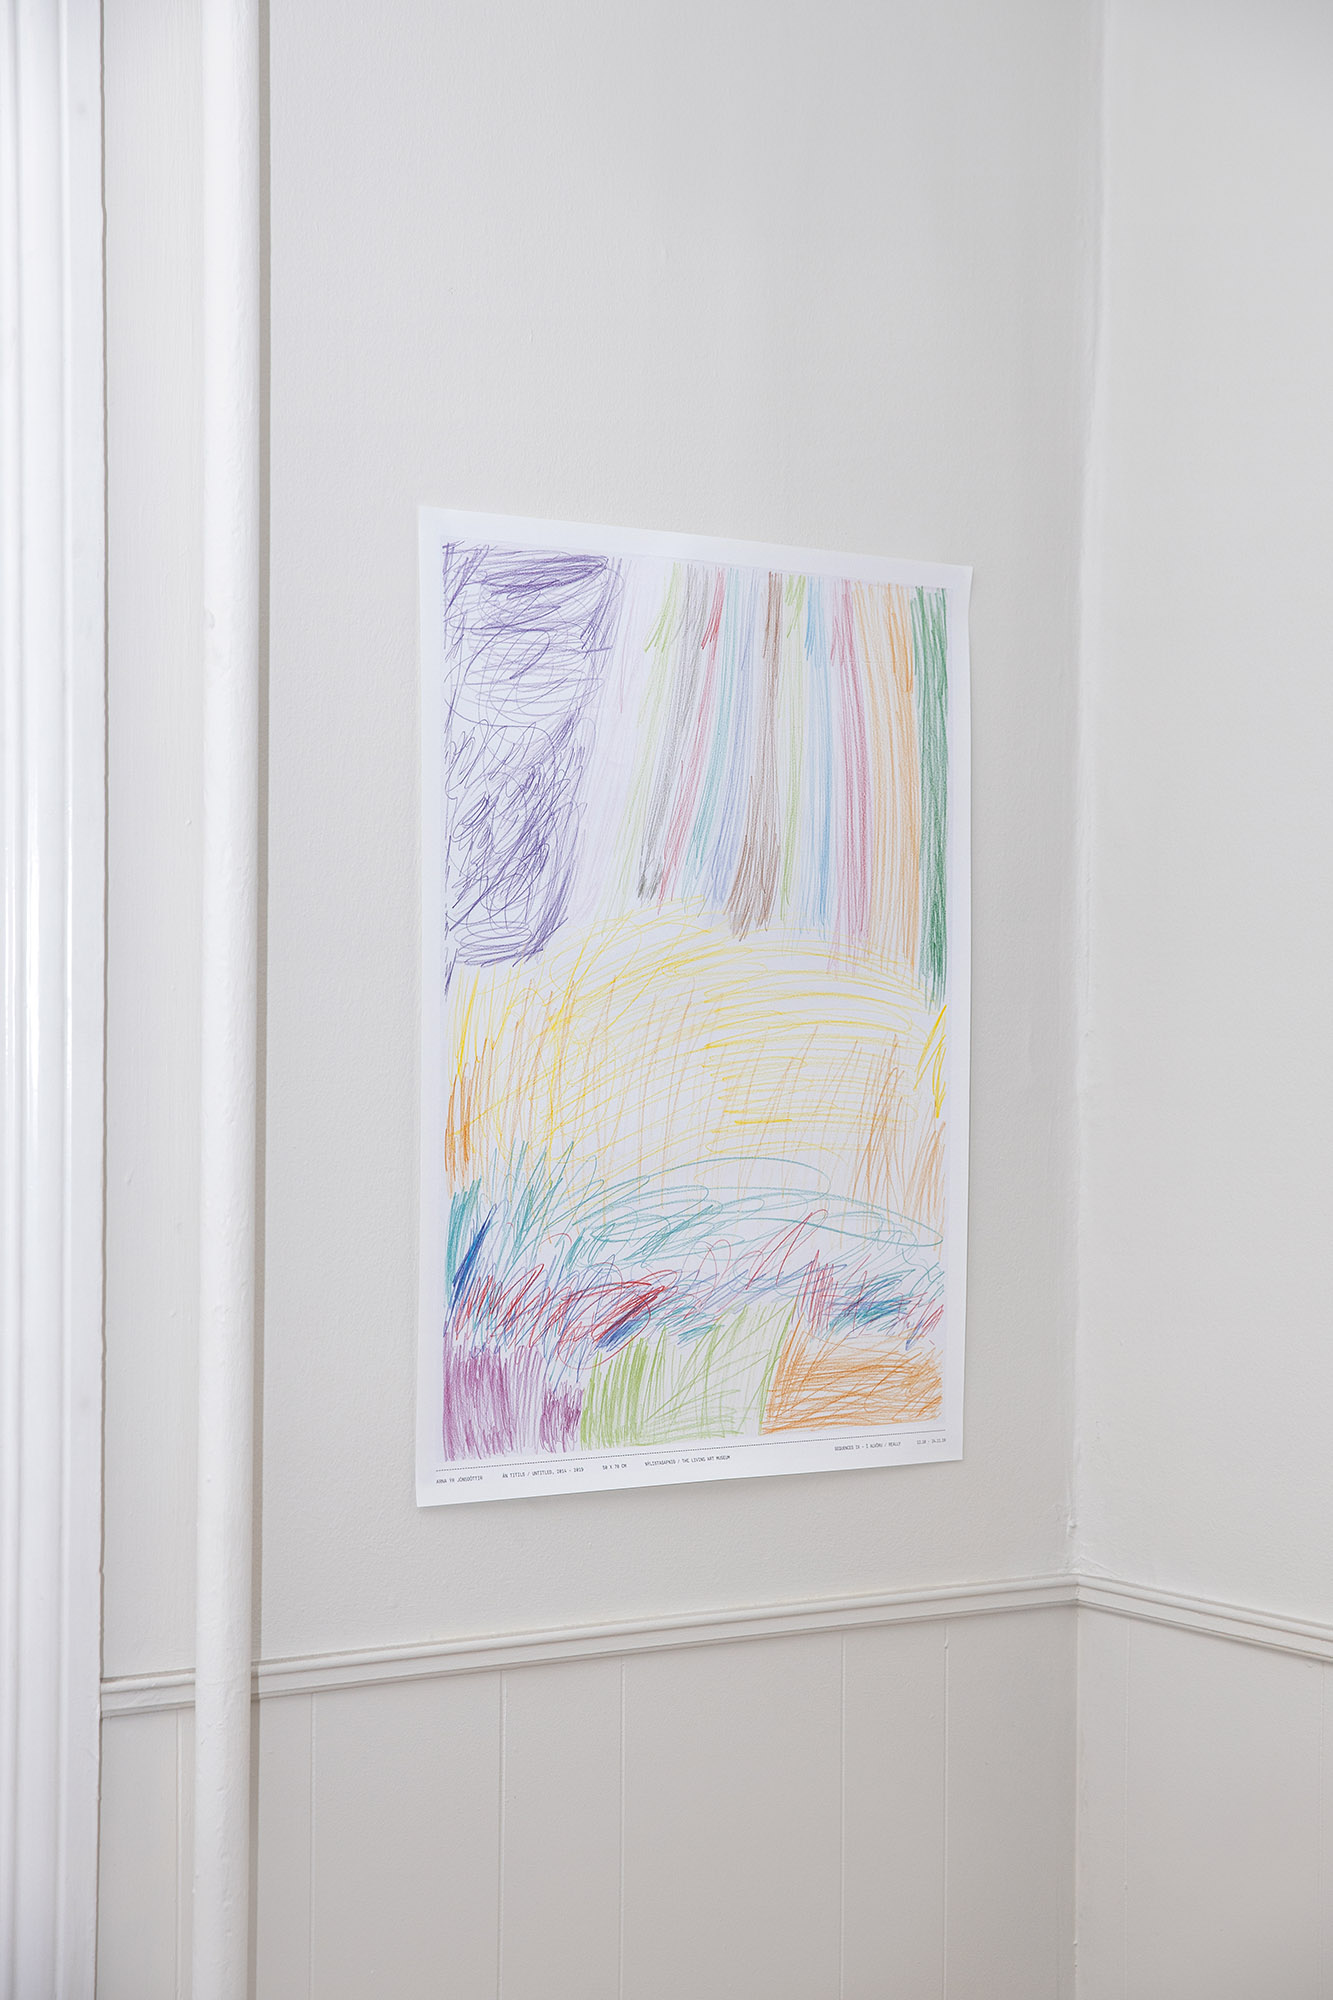 A poster hangs on a white wall in a corner of a room. A thin pipe is located close to the left side of the poster. The poster shows a colorful, childlike drawing, made with color pencils.